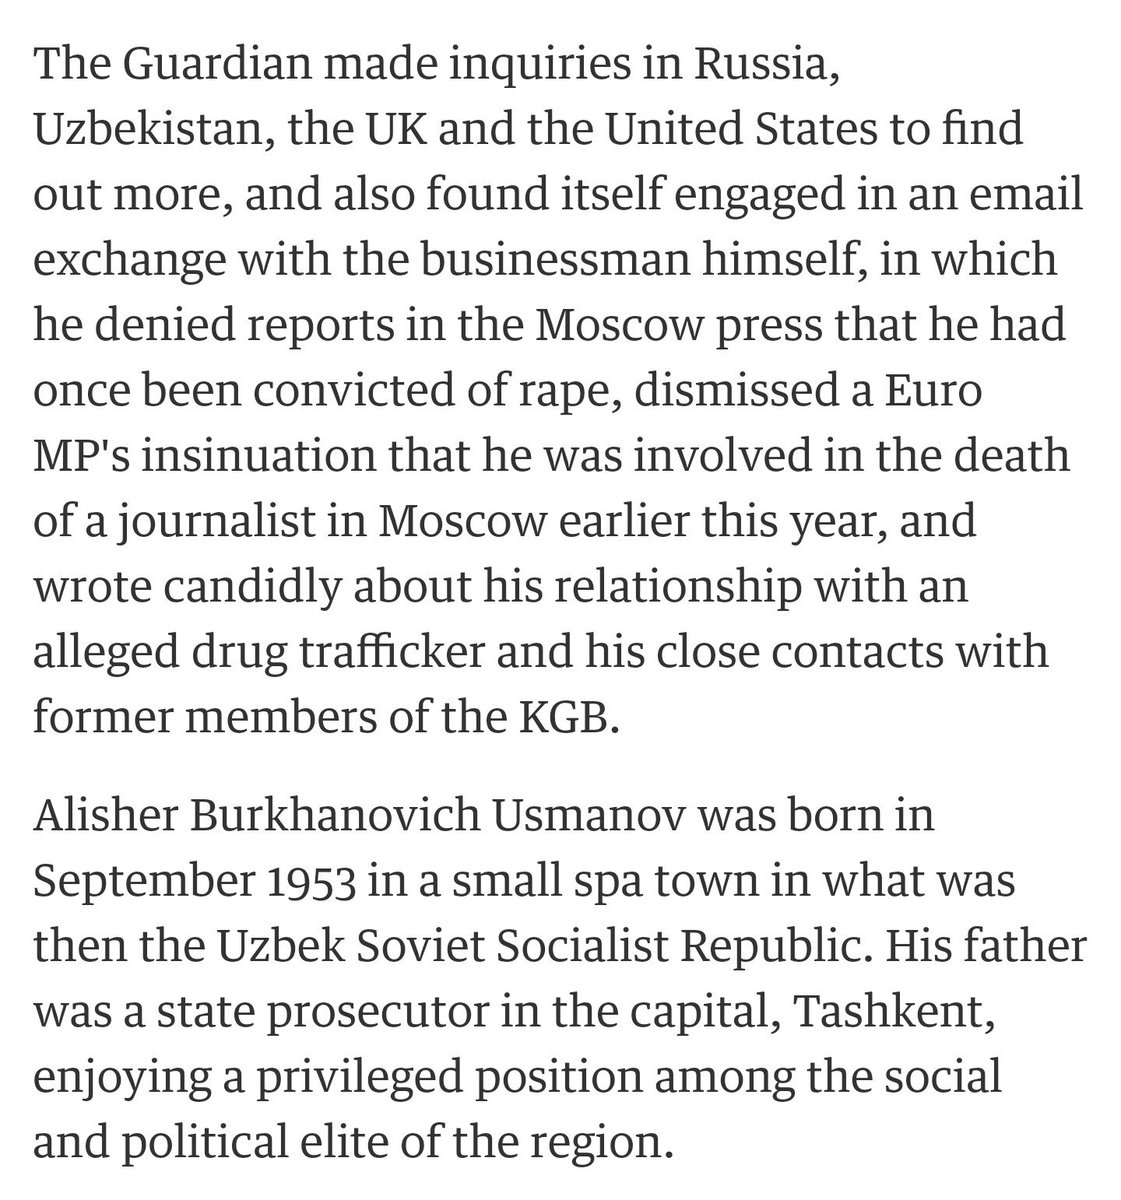 46/ Mark Zuckberg chose this Russian Oligarch as his biz partner in 2009. Is Facebook now just a tool of Putin's? https://www.theguardian.com/world/2007/nov/19/football.russia